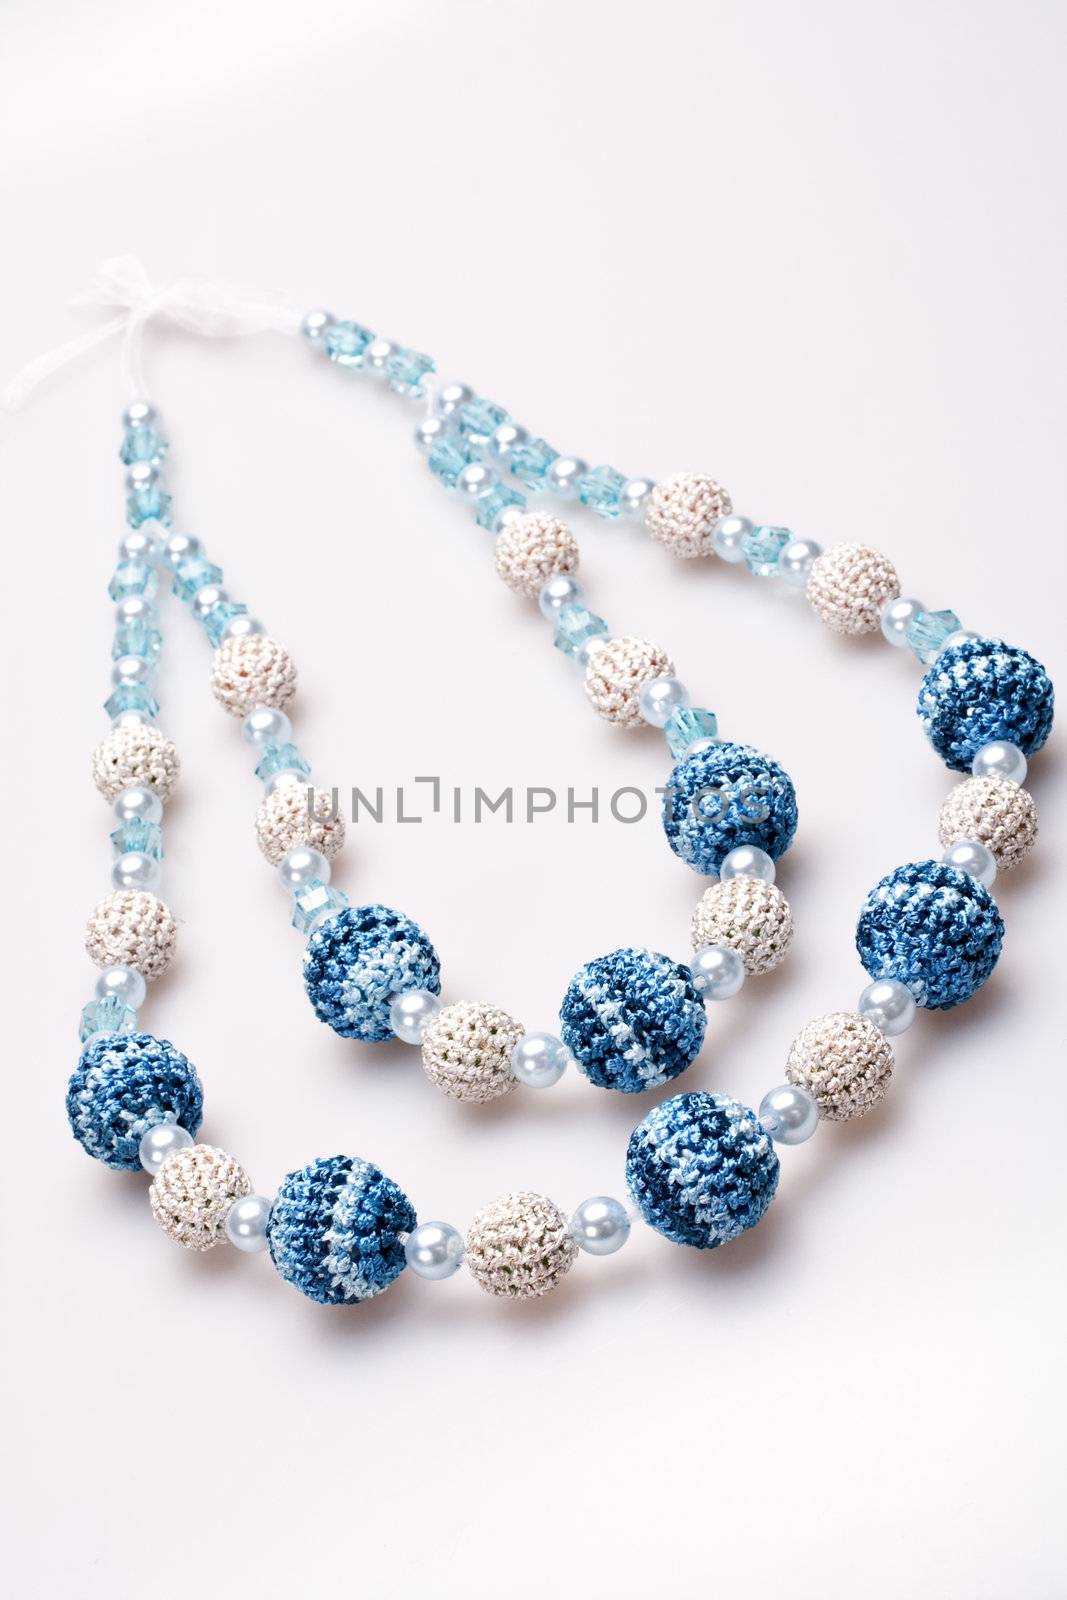 necklace of beads knitted on a white background